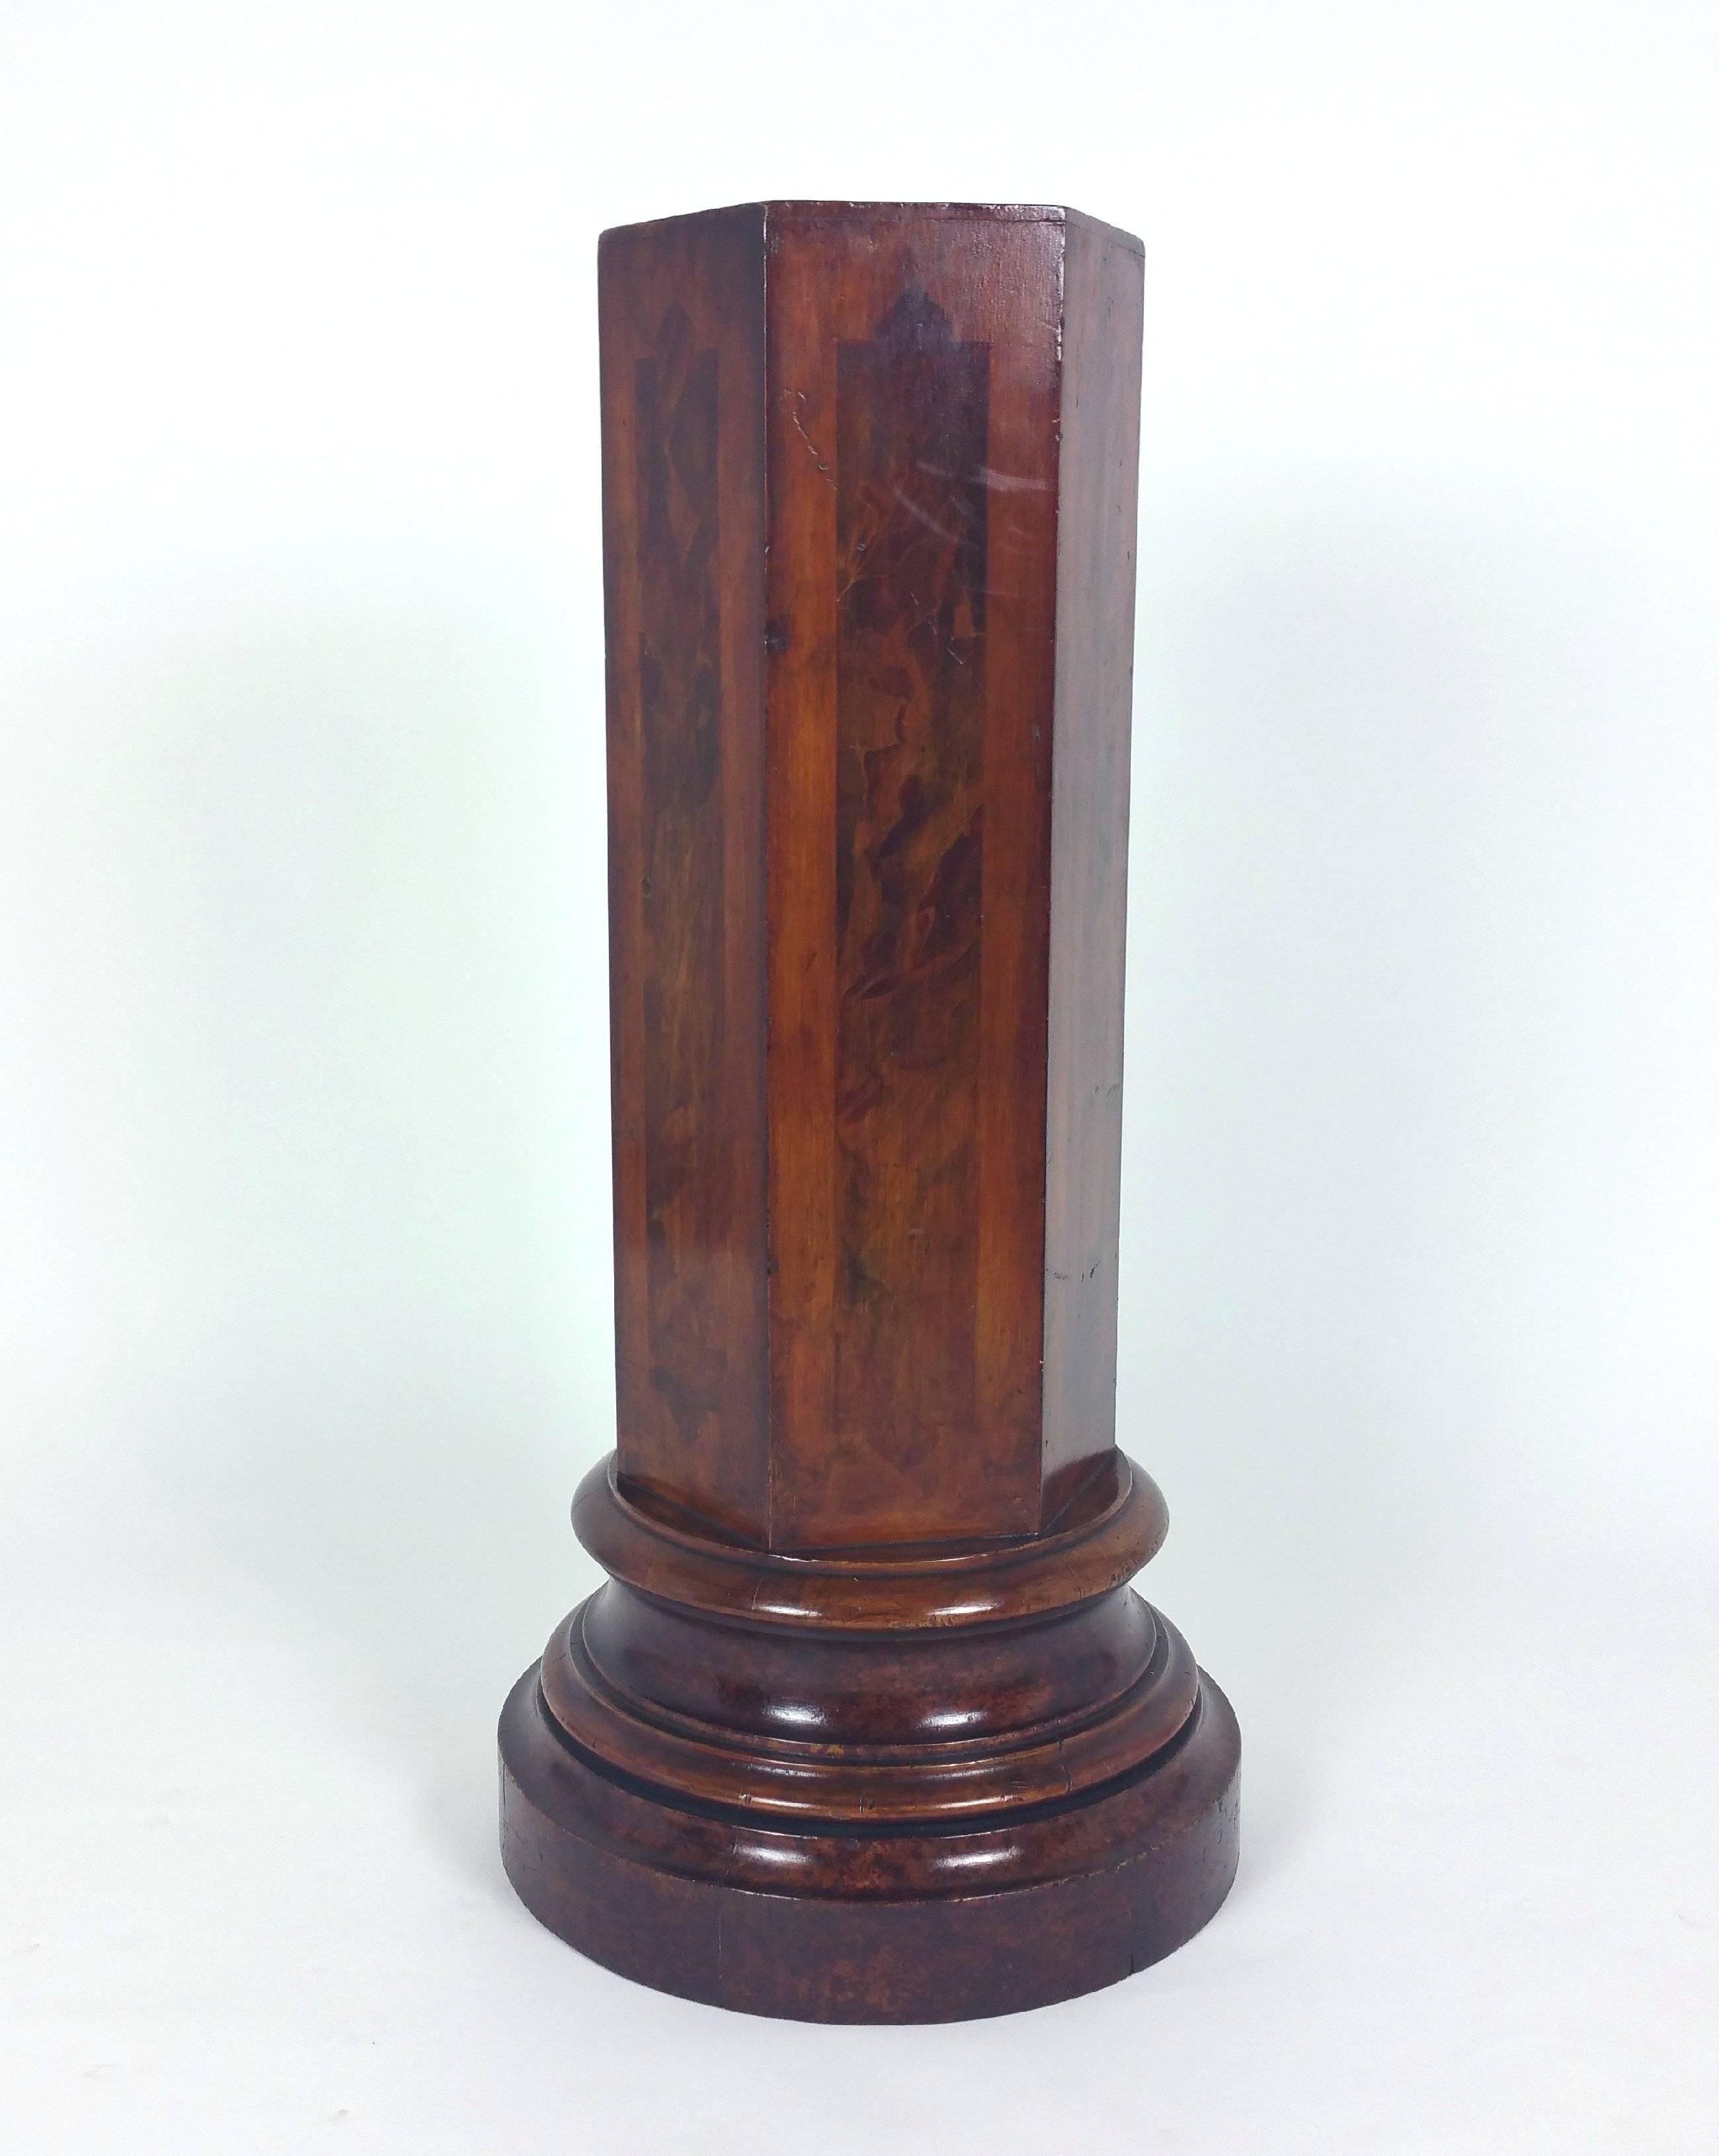 This very handsome 19th century Venetian hexagonal plinth/ pedestal features a painted faux walnut decoration on a circular base. The pedestal measures 10 in – 25.5 cm in diameter on the top and 17 ¼ in – 43.8 cm at the base with a height of 36 in –